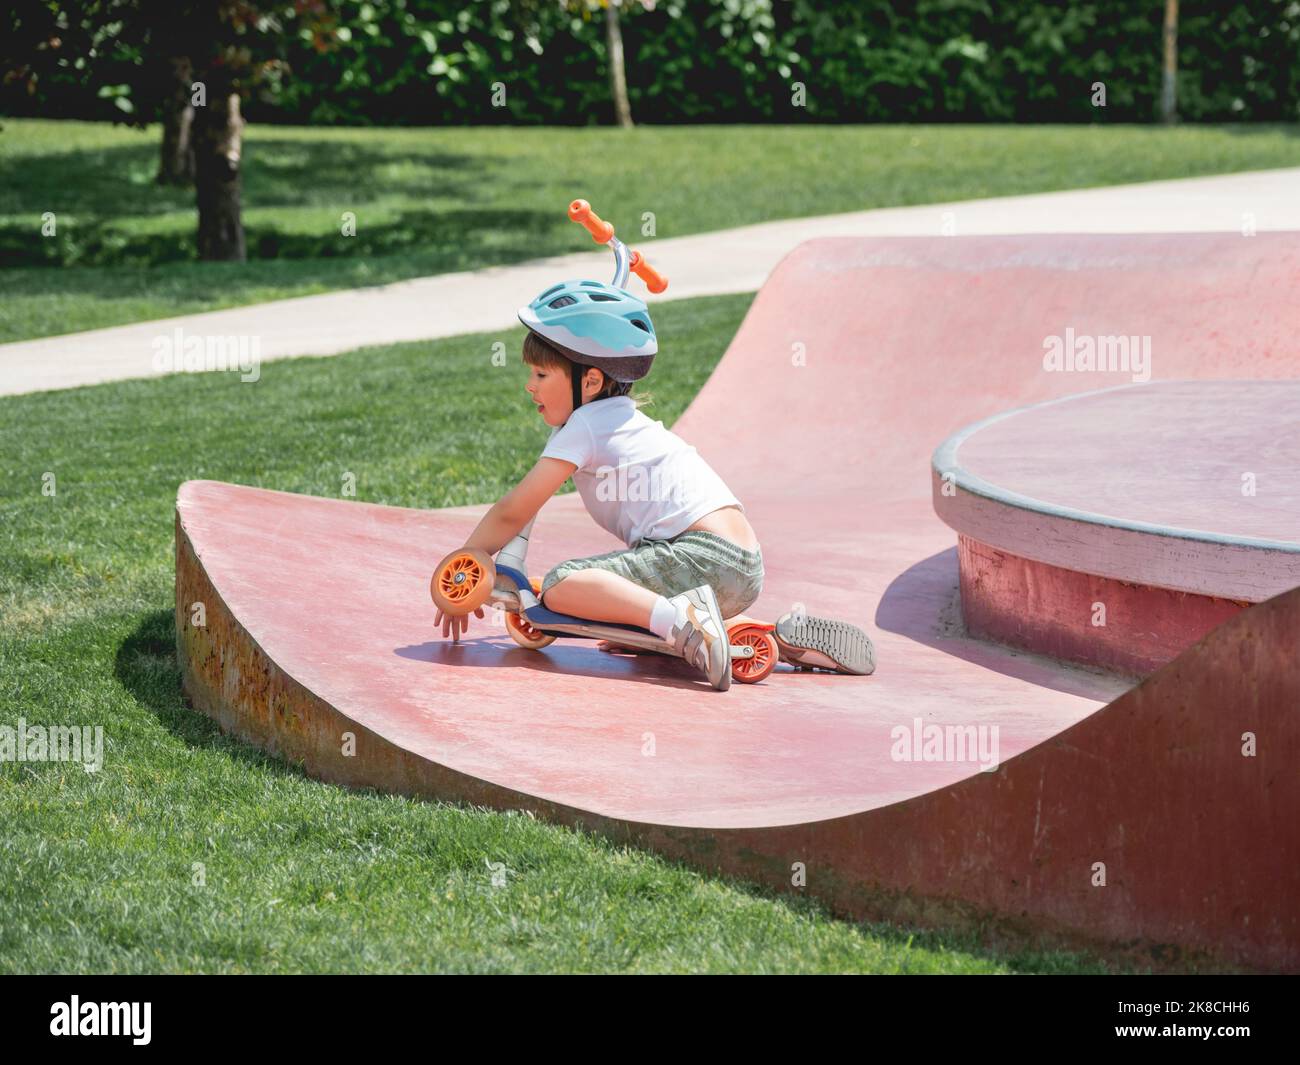 Little boy fell off kick scooter while riding in skate park. Special concrete bowl structures in urban park. Training to skate at summer. Stock Photo